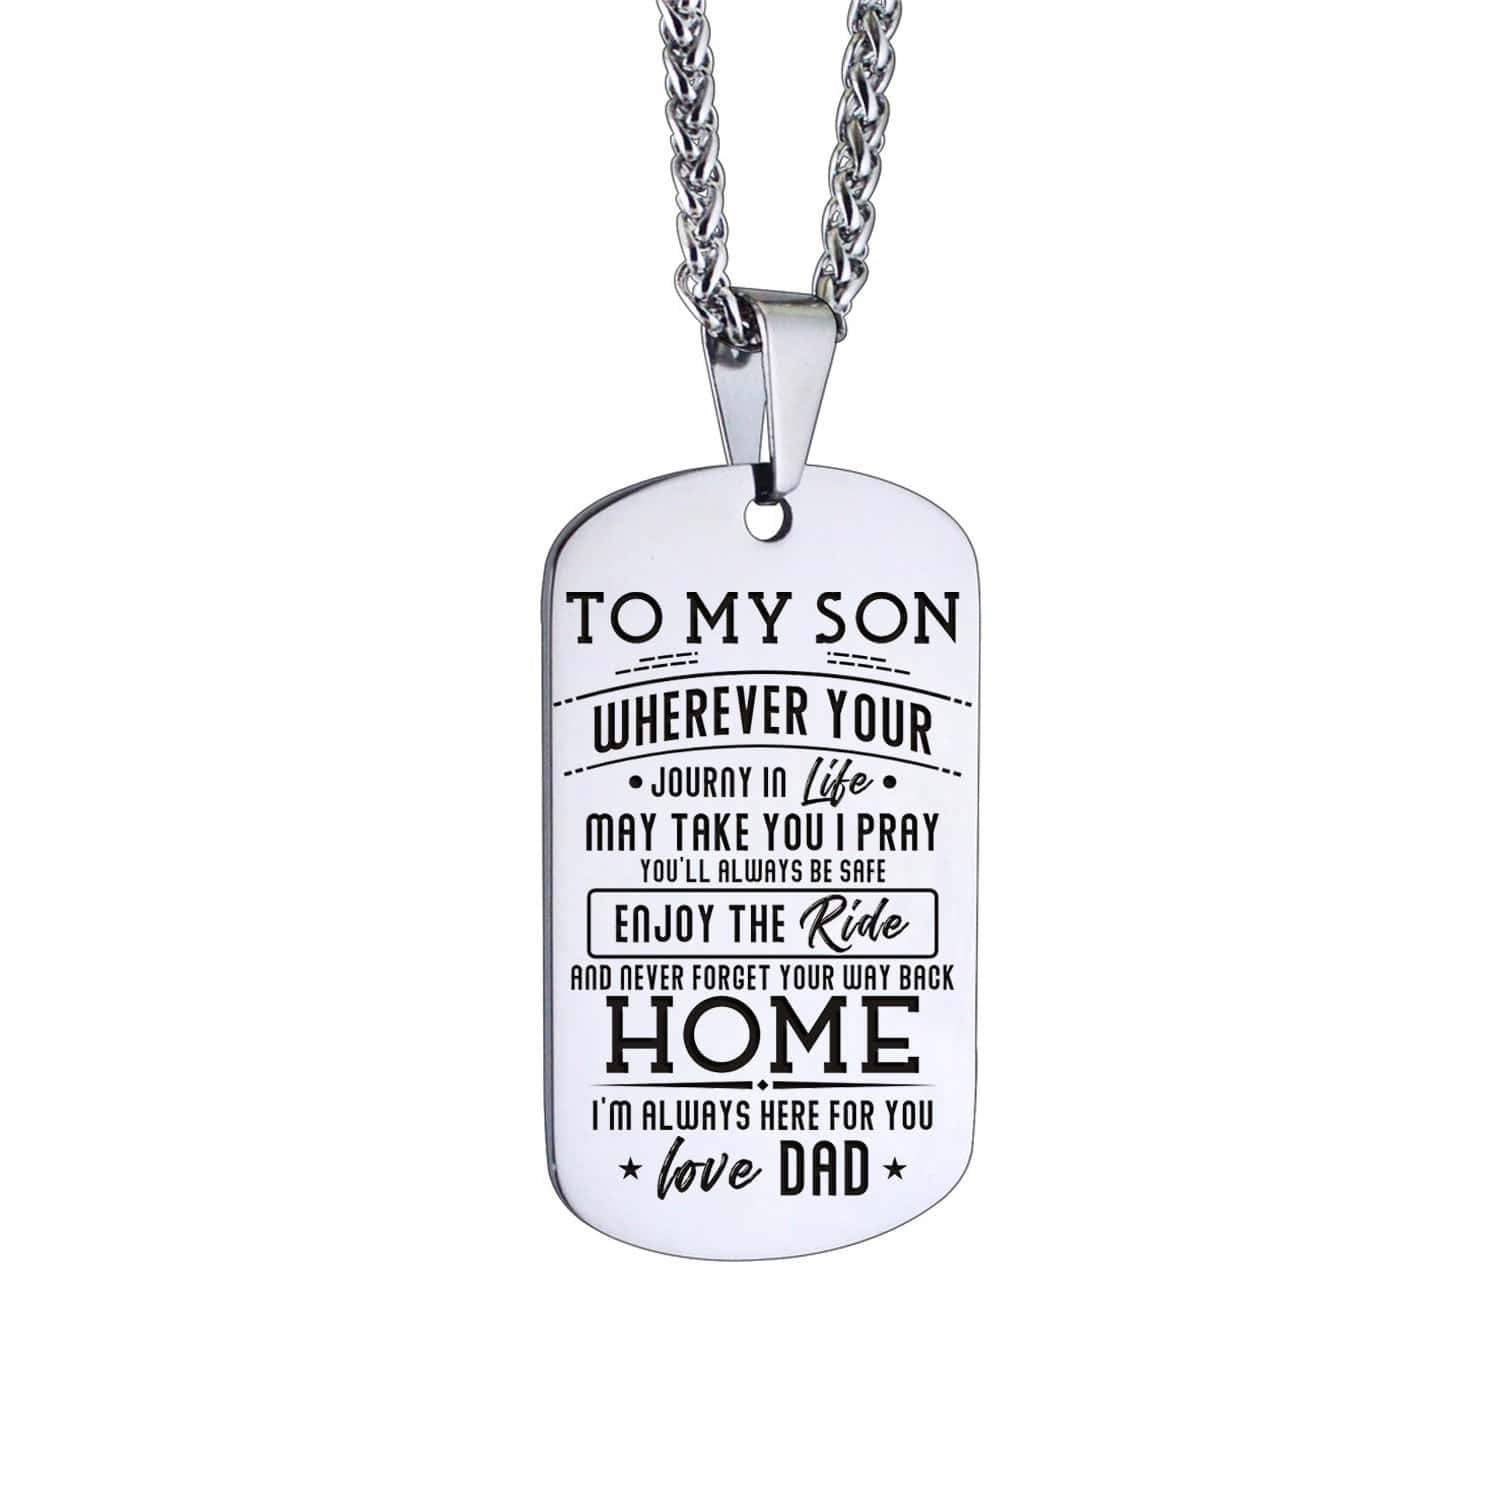 Here For You Personalized Dog Tags For 